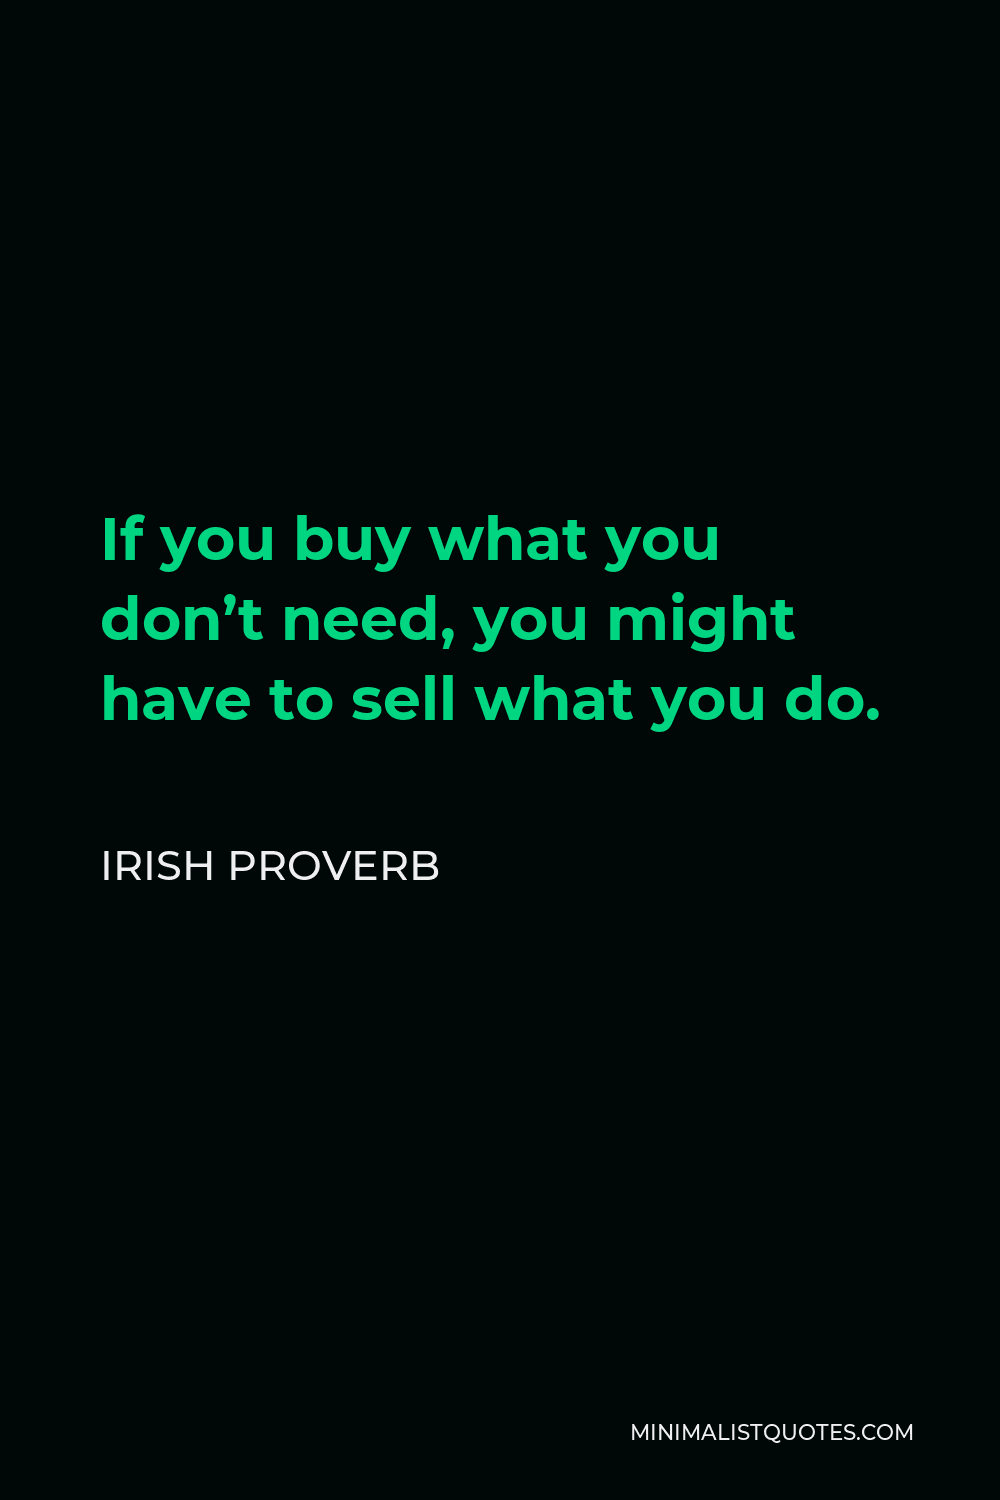 Irish Proverb Quote - If you buy what you don’t need, you might have to sell what you do.